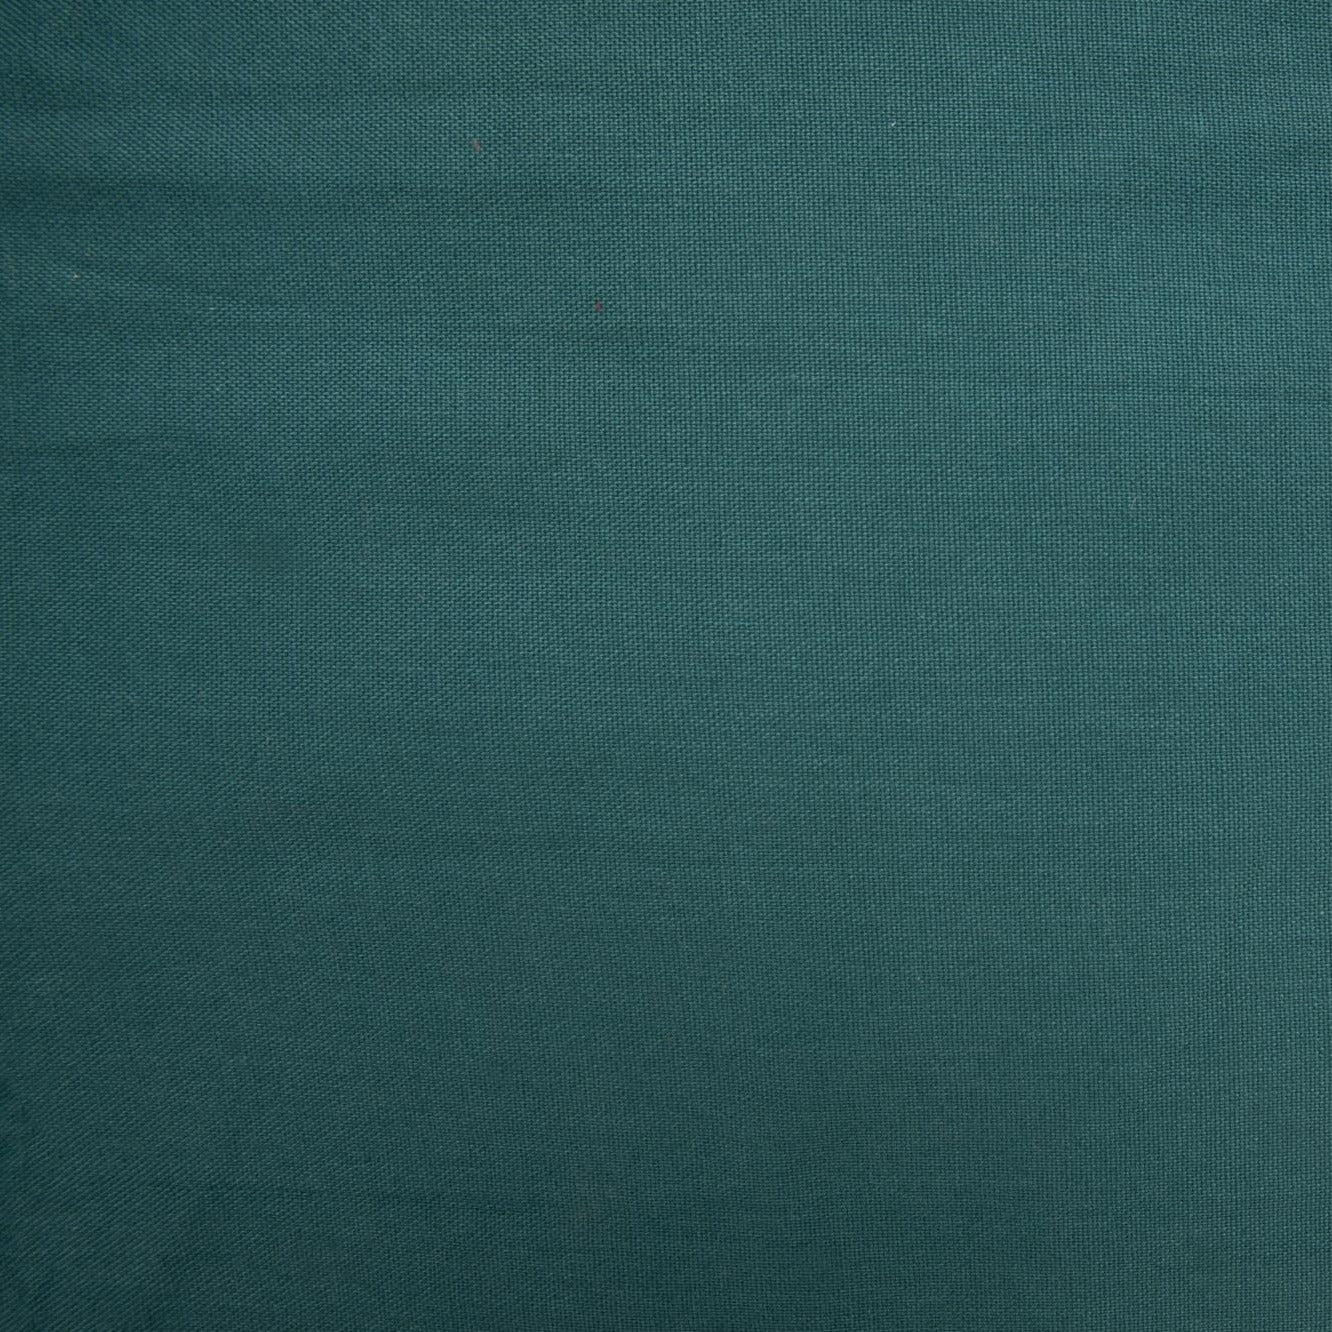 Teal Solid Casement Fabric Trade UNO